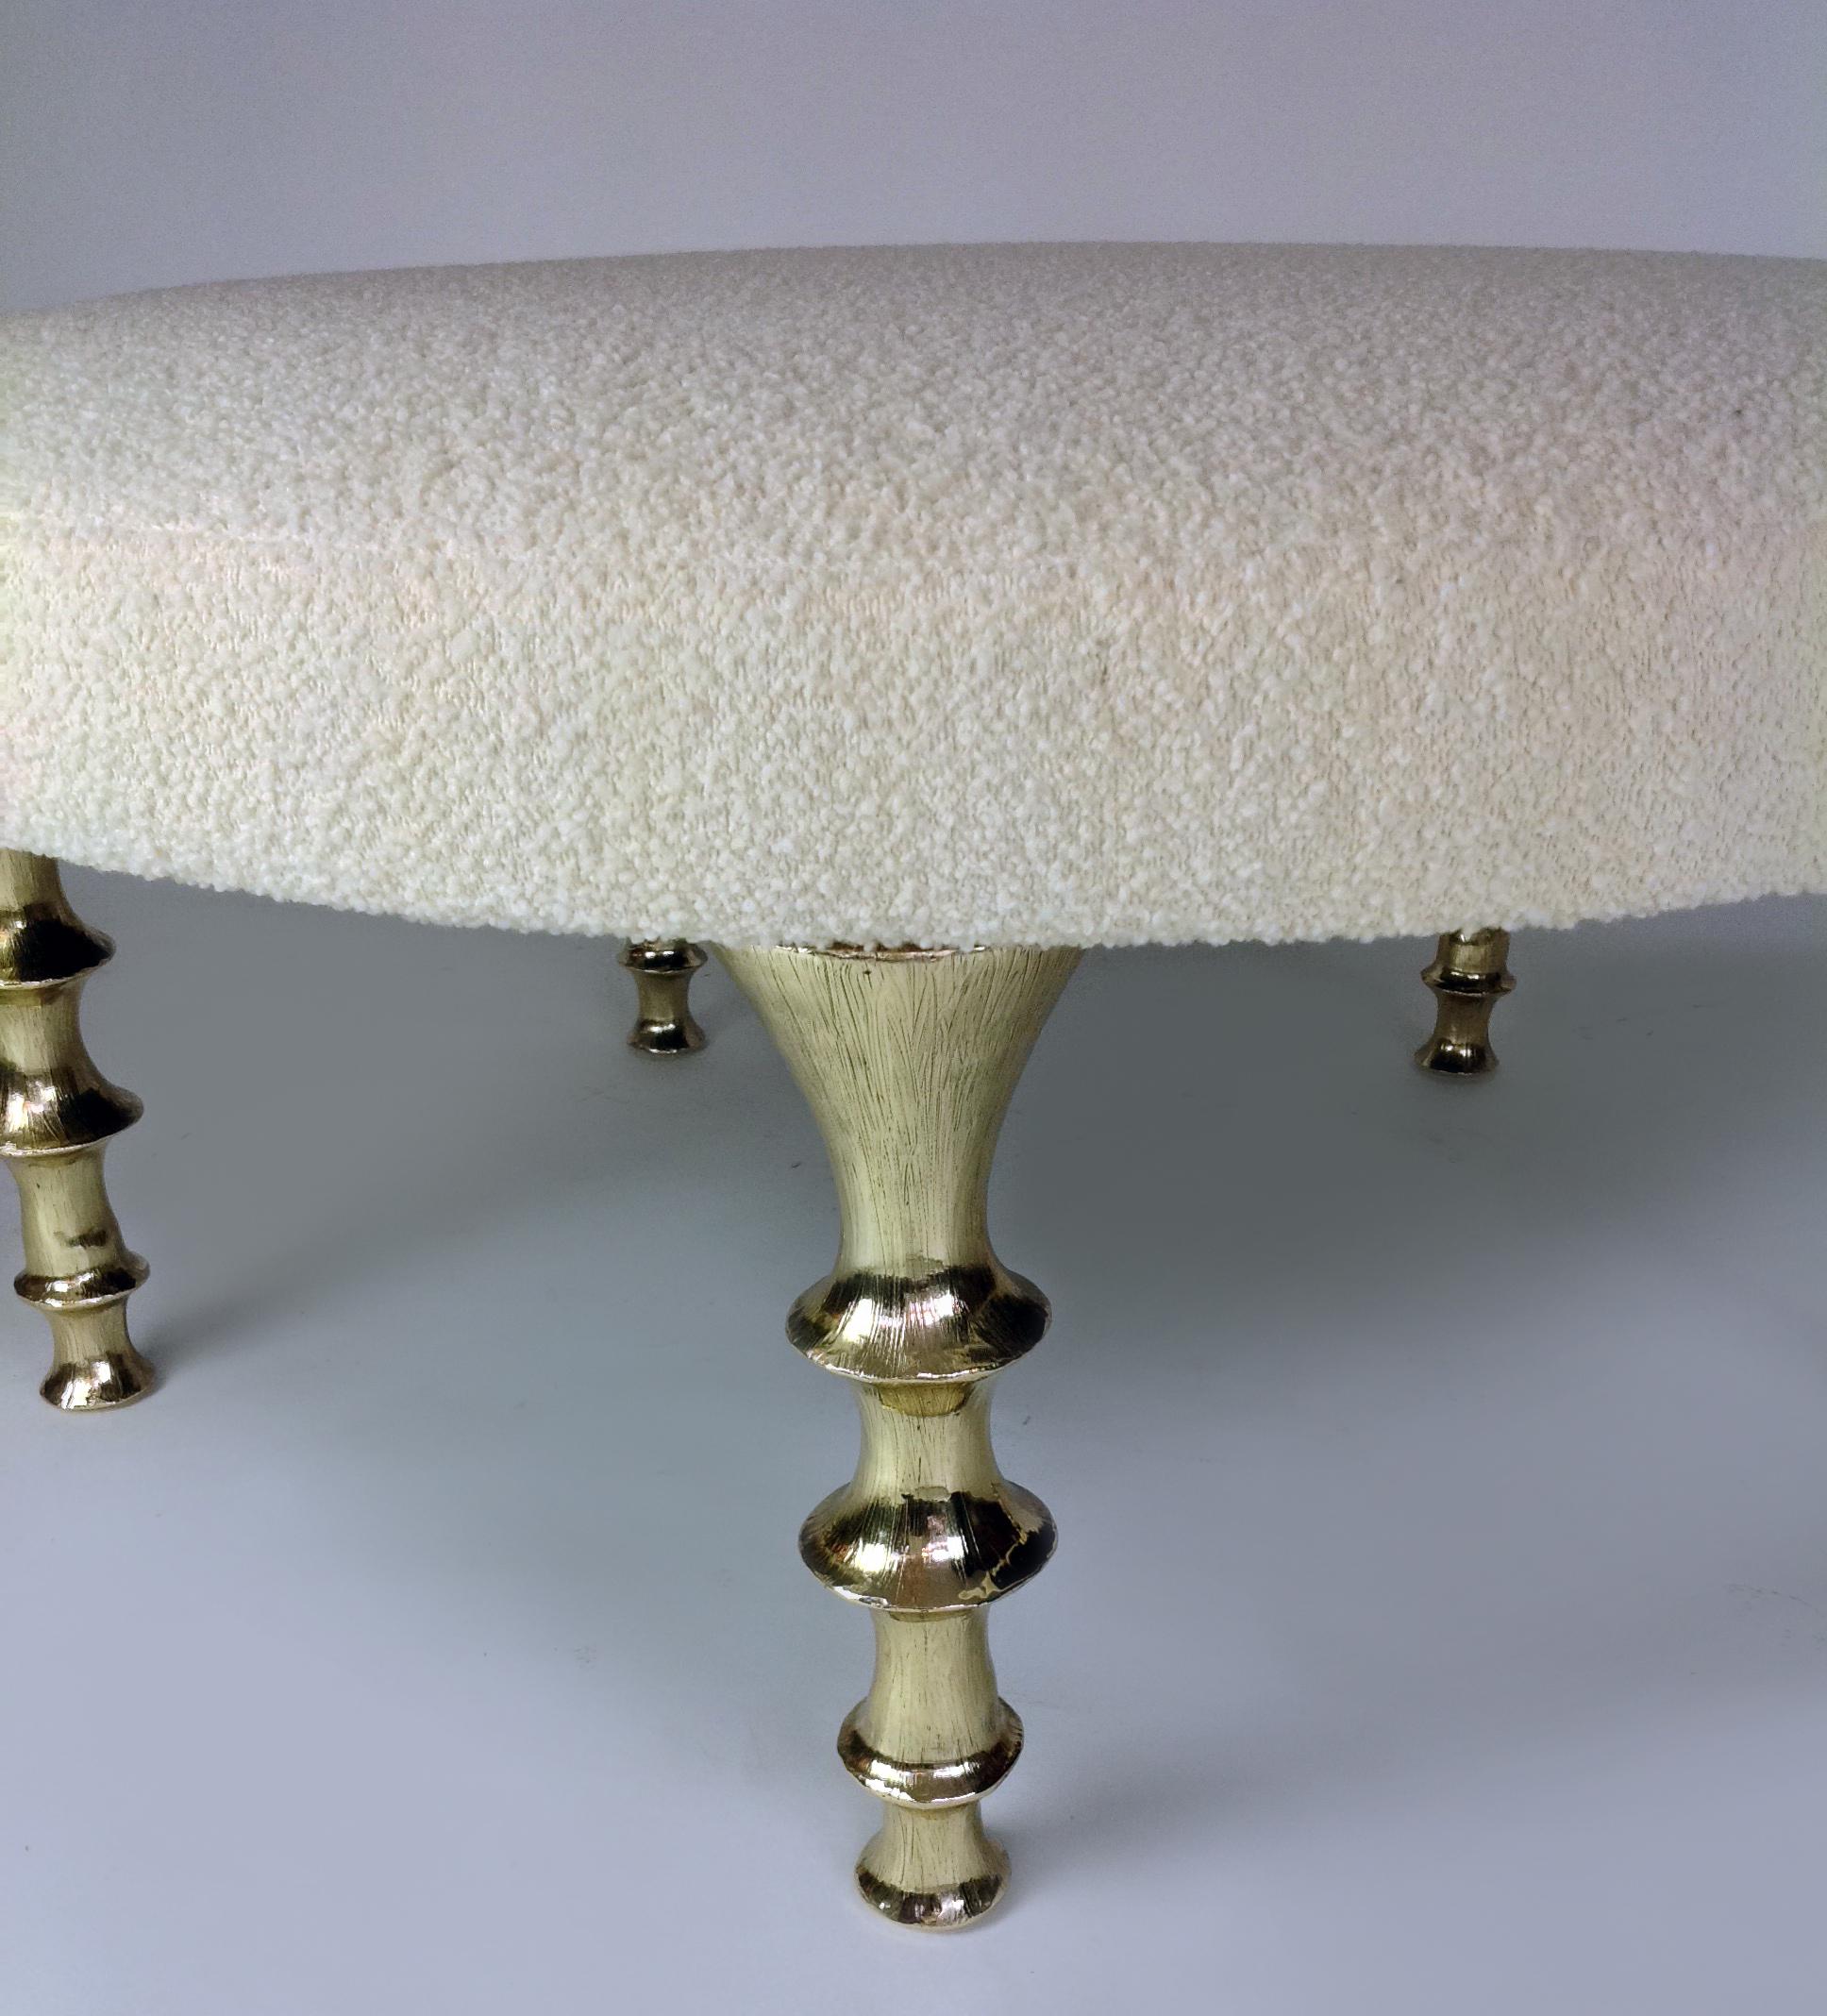 This round ottoman make a dramatic statement in your interior. It has five powerful cast gold bronze legs, with an organic feel. The cushion can be made is various shapes, Covered in your own fabric or hide. We can also create stools or benches with